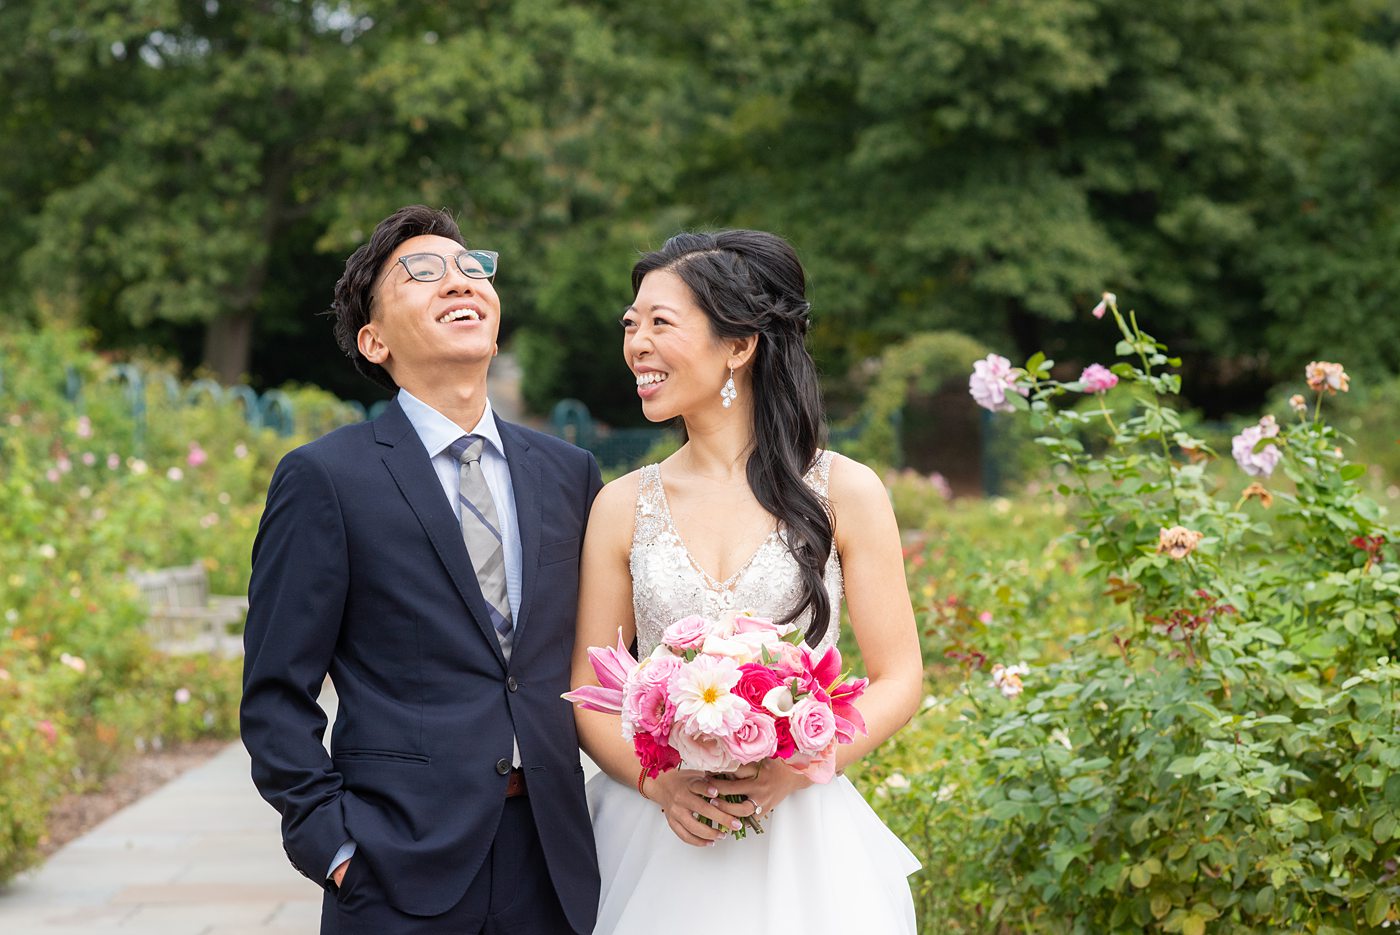 New York Botanical Garden wedding photos by Mikkel Paige Photography. After the couple's engagement photoshoot in Manhattan I was so excited for their fall wedding near the Conservatory at the Terrace Room, at this NYC venue. #mikkelpaige #nybg #newyorkbotanicalgardenwedding #asianbride #NYBotanicalGarden #Bronxwedding #newyorkcityweddingvenues